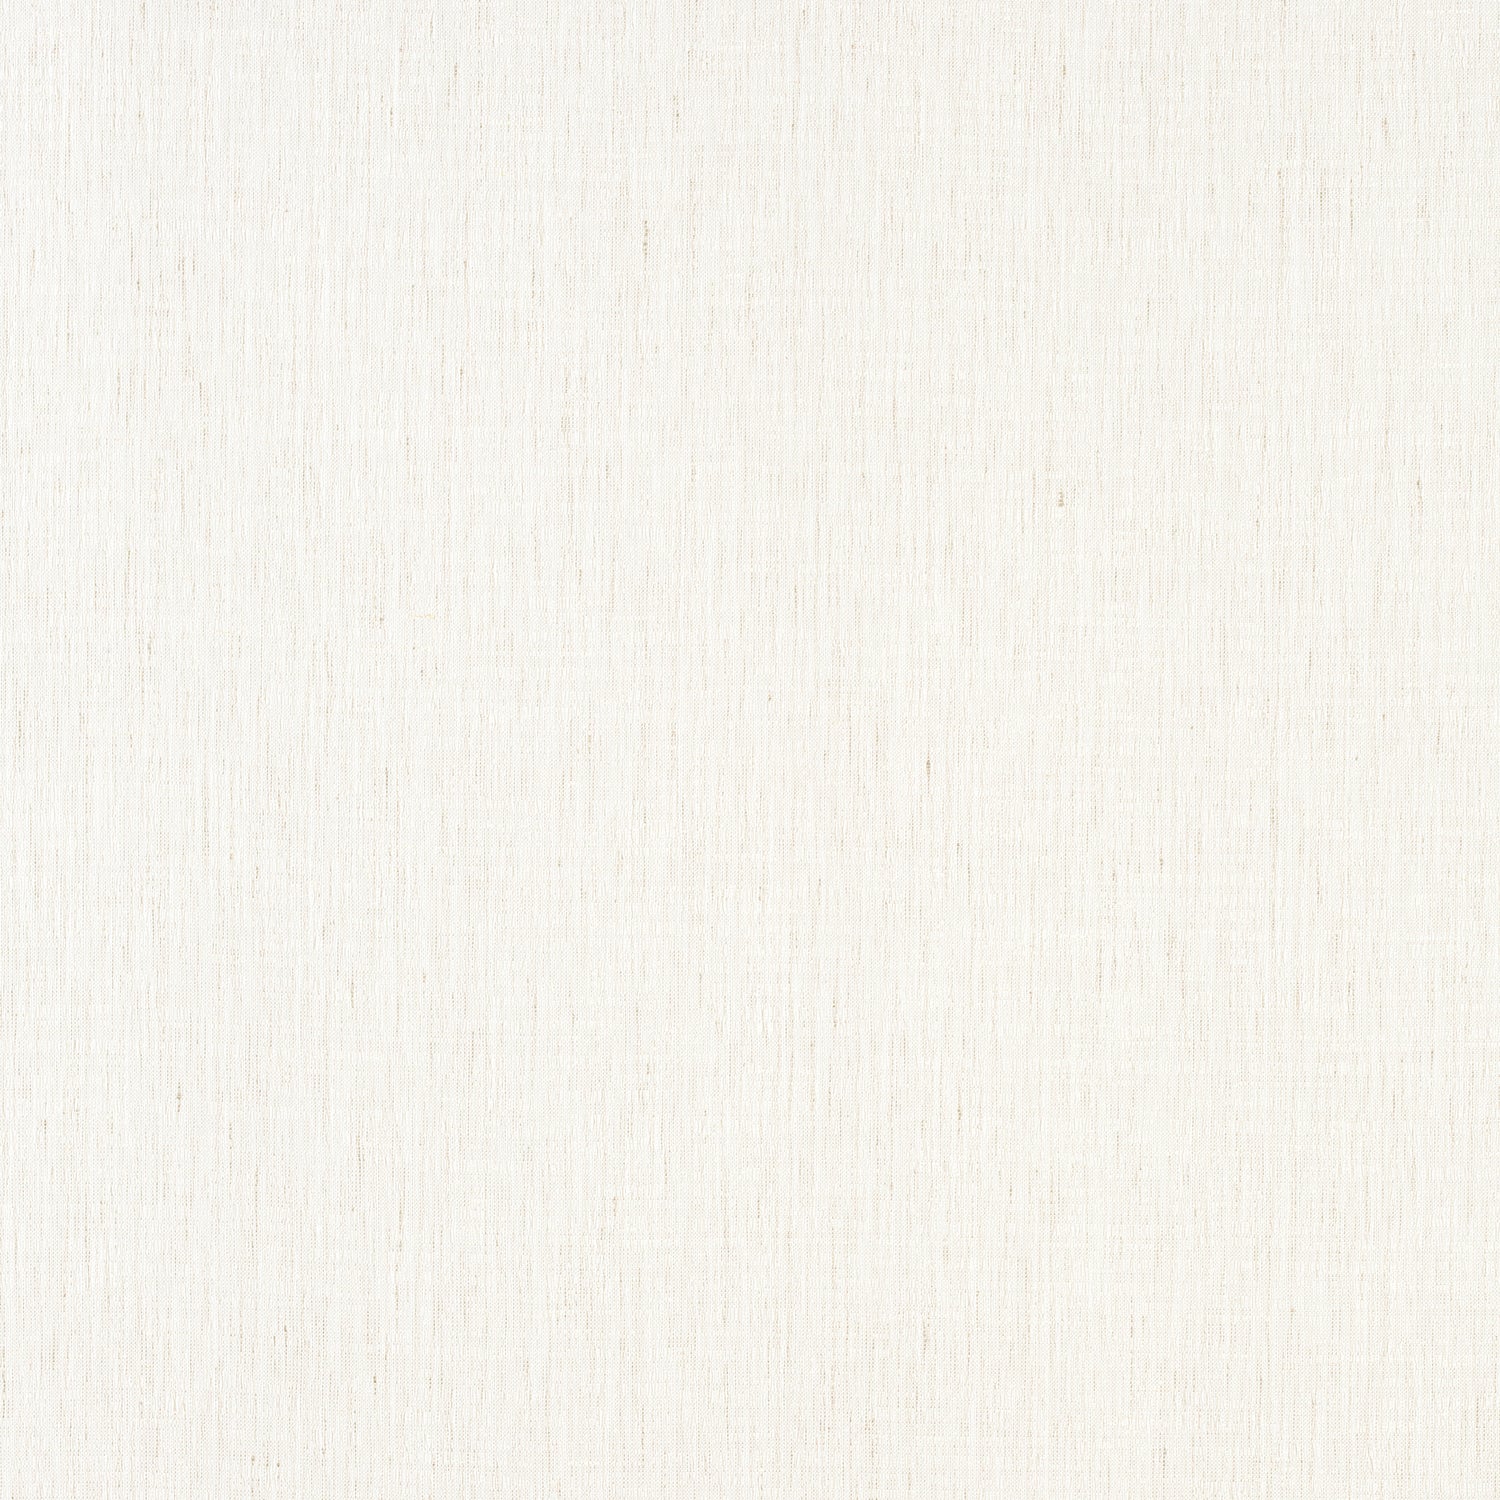 Sandhurst fabric in linen color - pattern number FWW7138 - by Thibaut in the Atmosphere collection